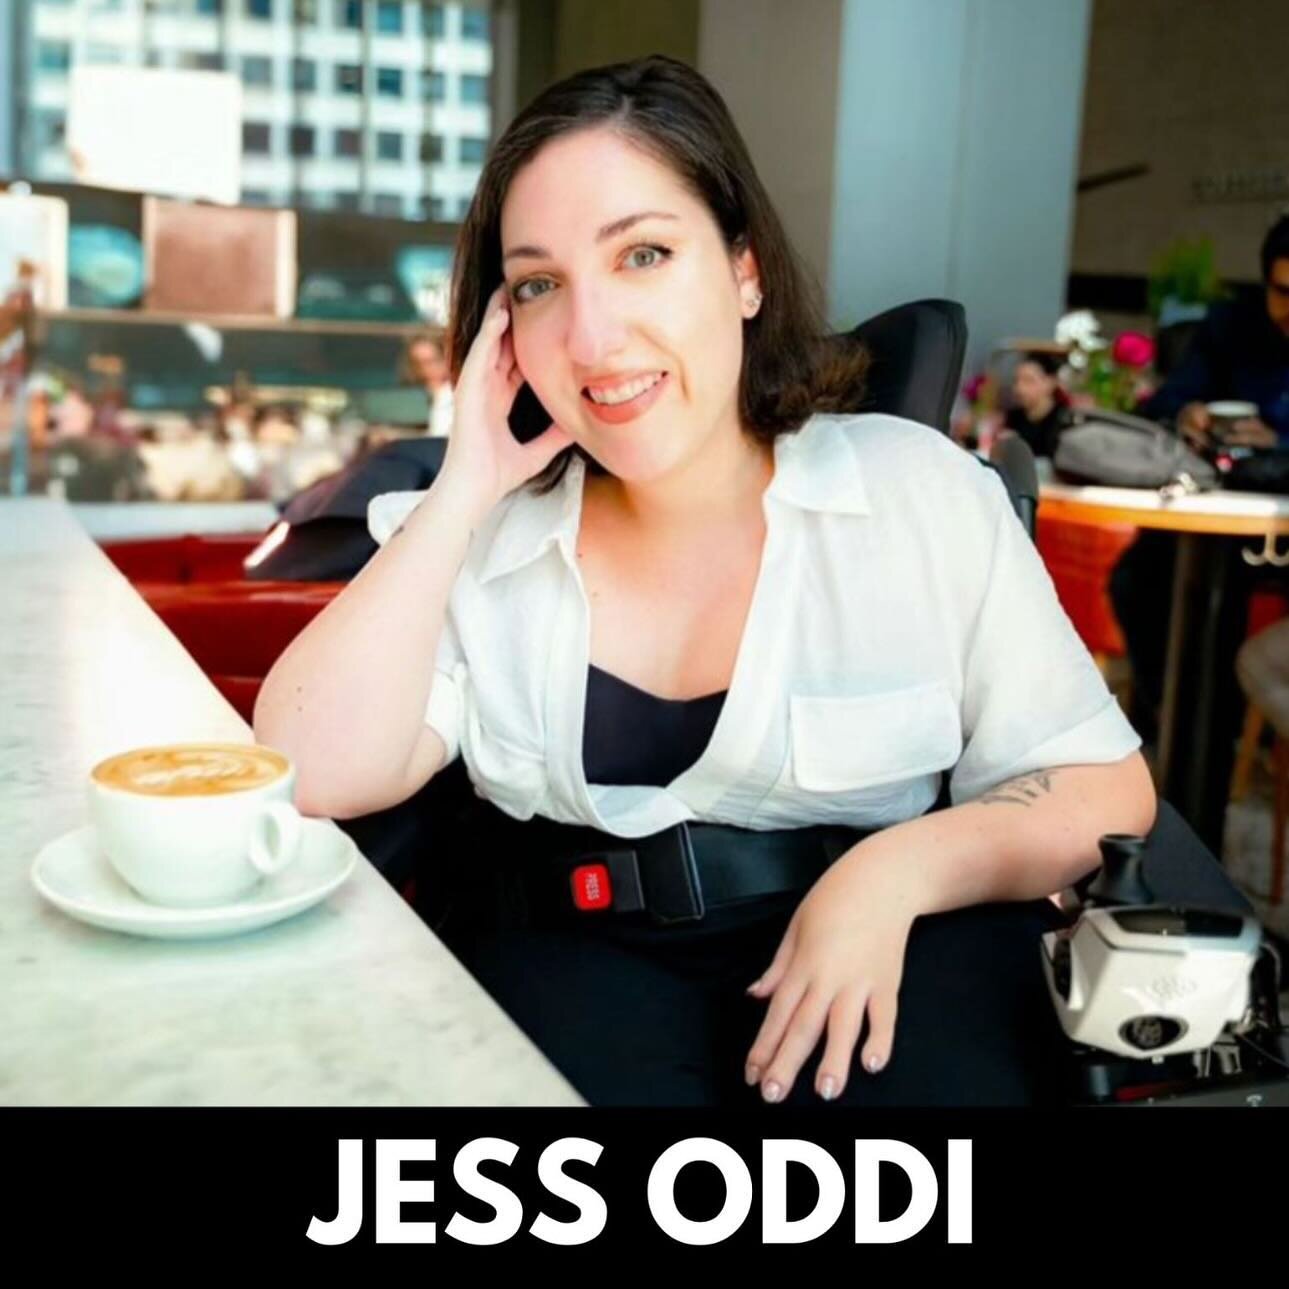 Name:&nbsp;Jessica Oddi
Pronouns:&nbsp;She/Her
Job Title:&nbsp;Disabled Designer

Today we are celebrating&nbsp;@oddi.jessica as part of our &lsquo;Any Brief&rsquo; campaign designed to highlight some of the brilliant talent we get the pleasure of wo